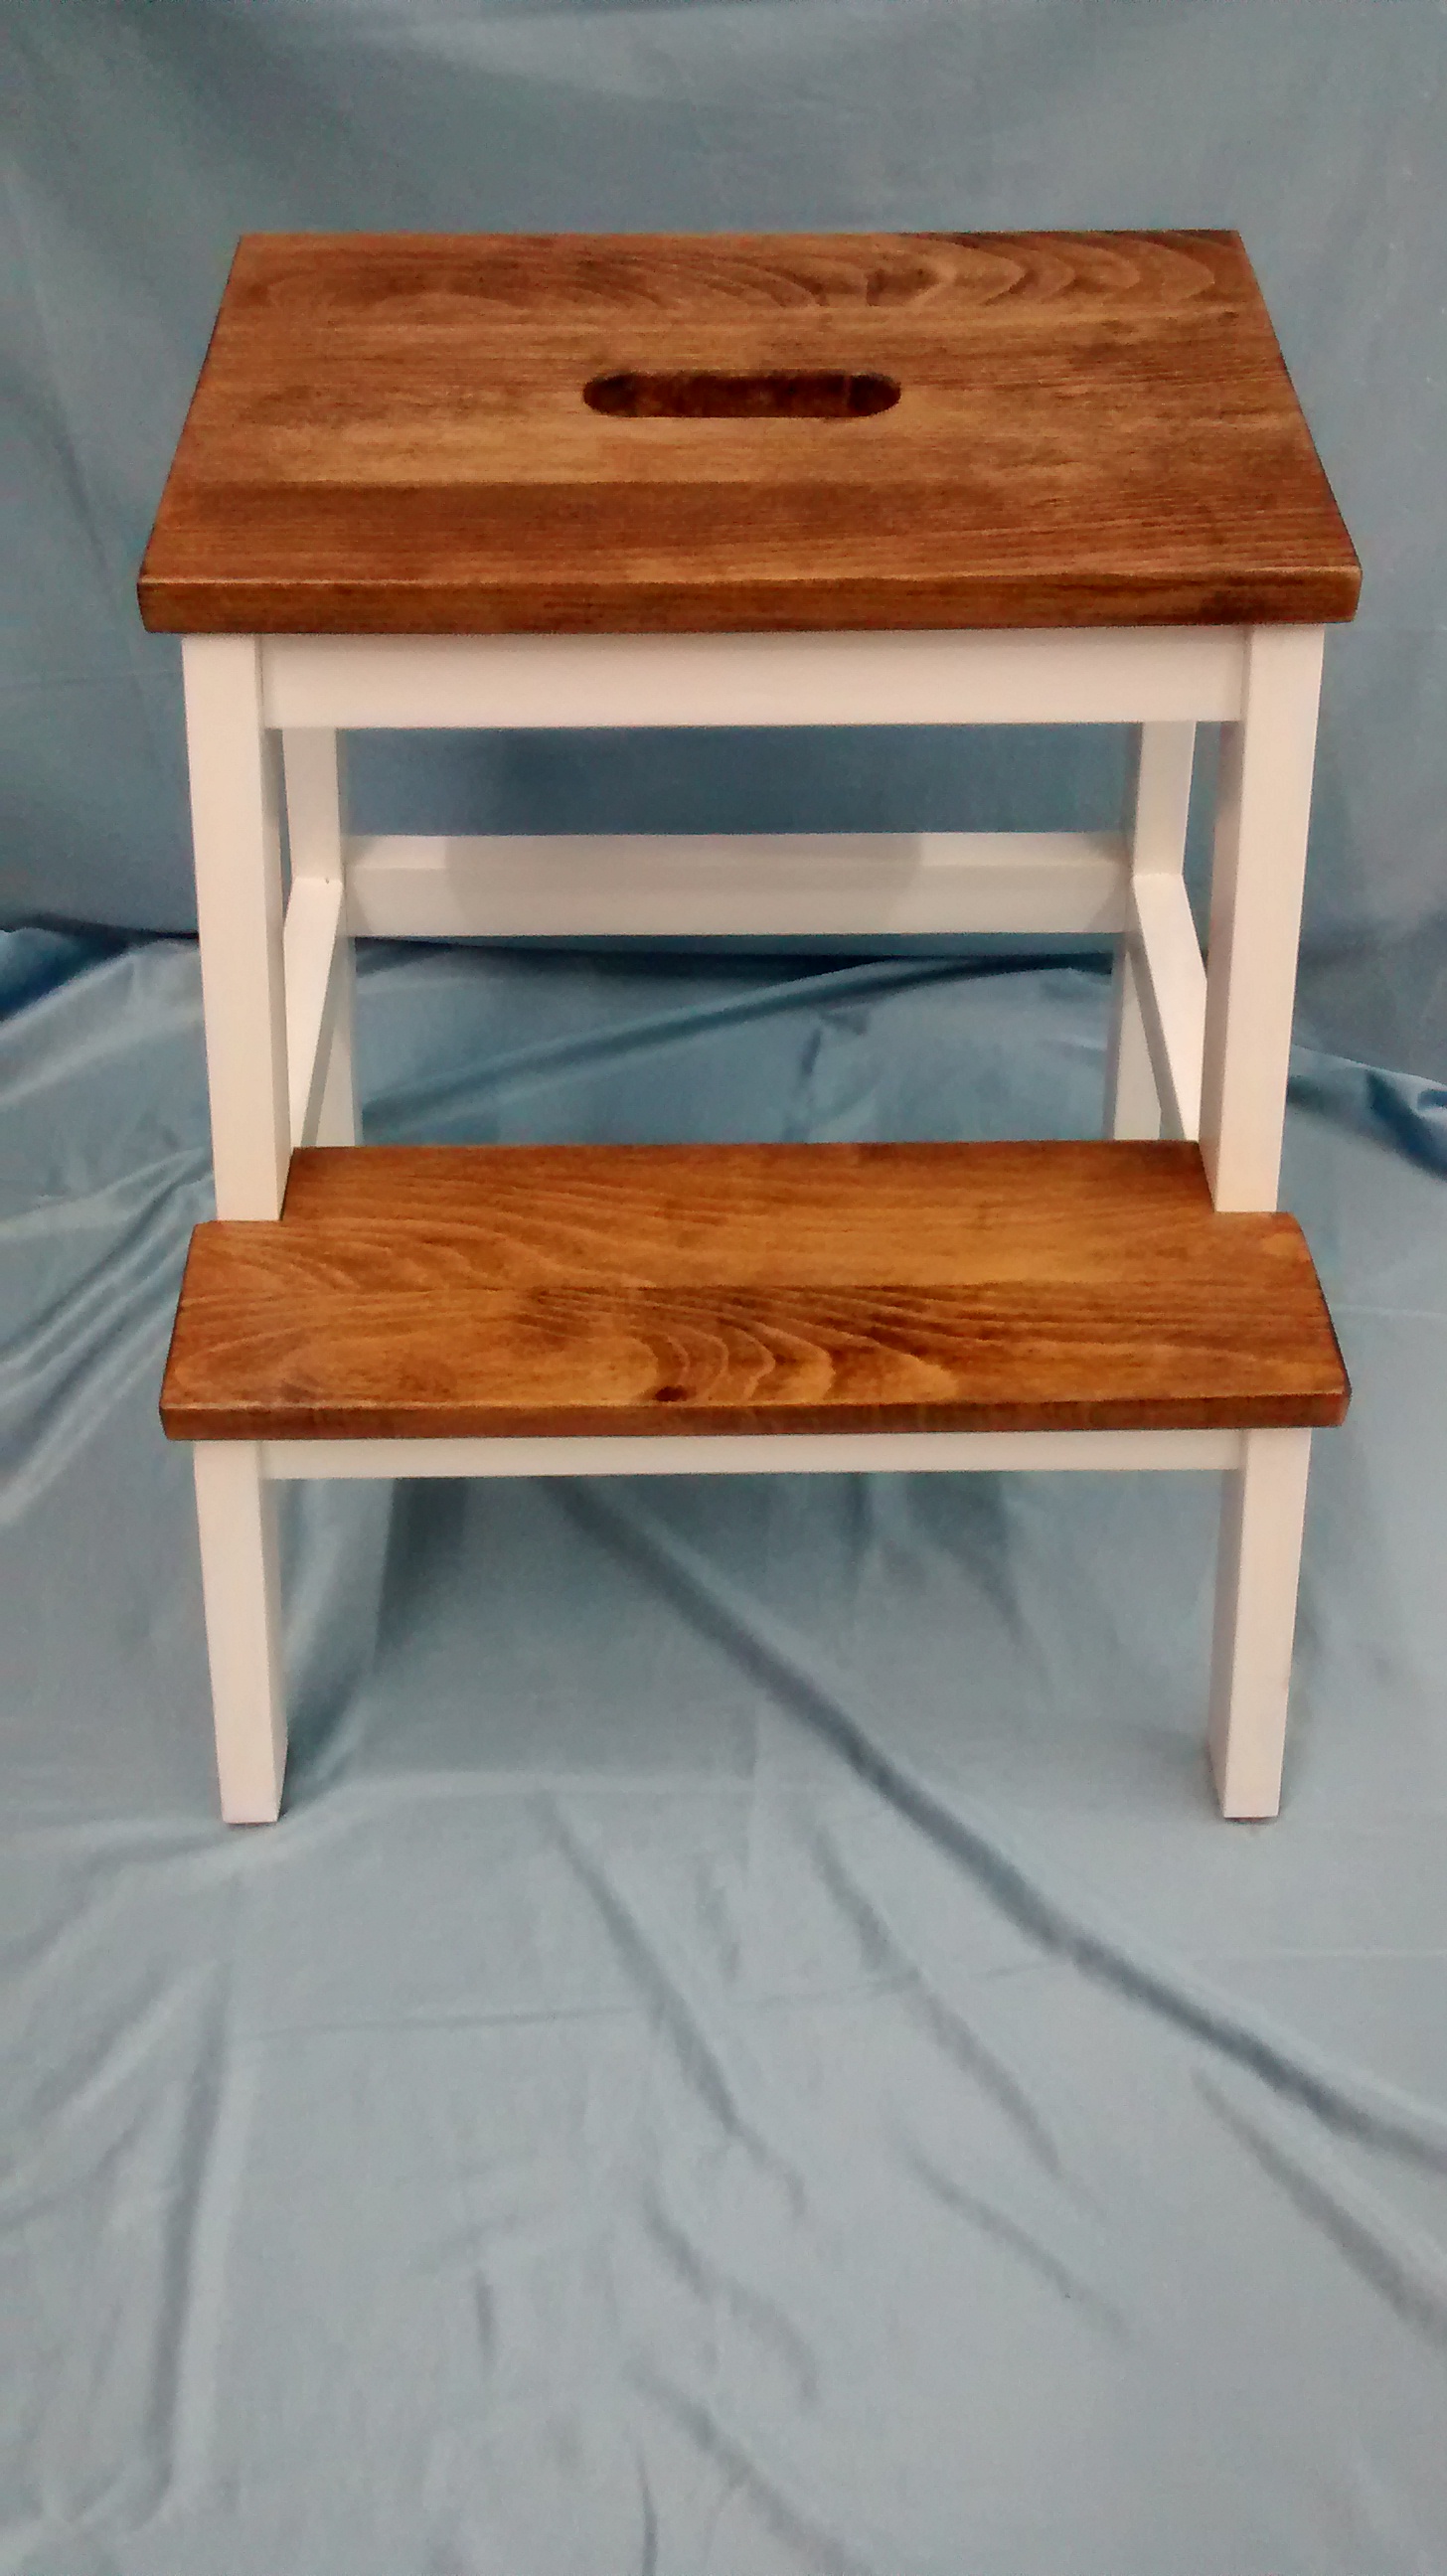 Upgraded Two-Step Stool